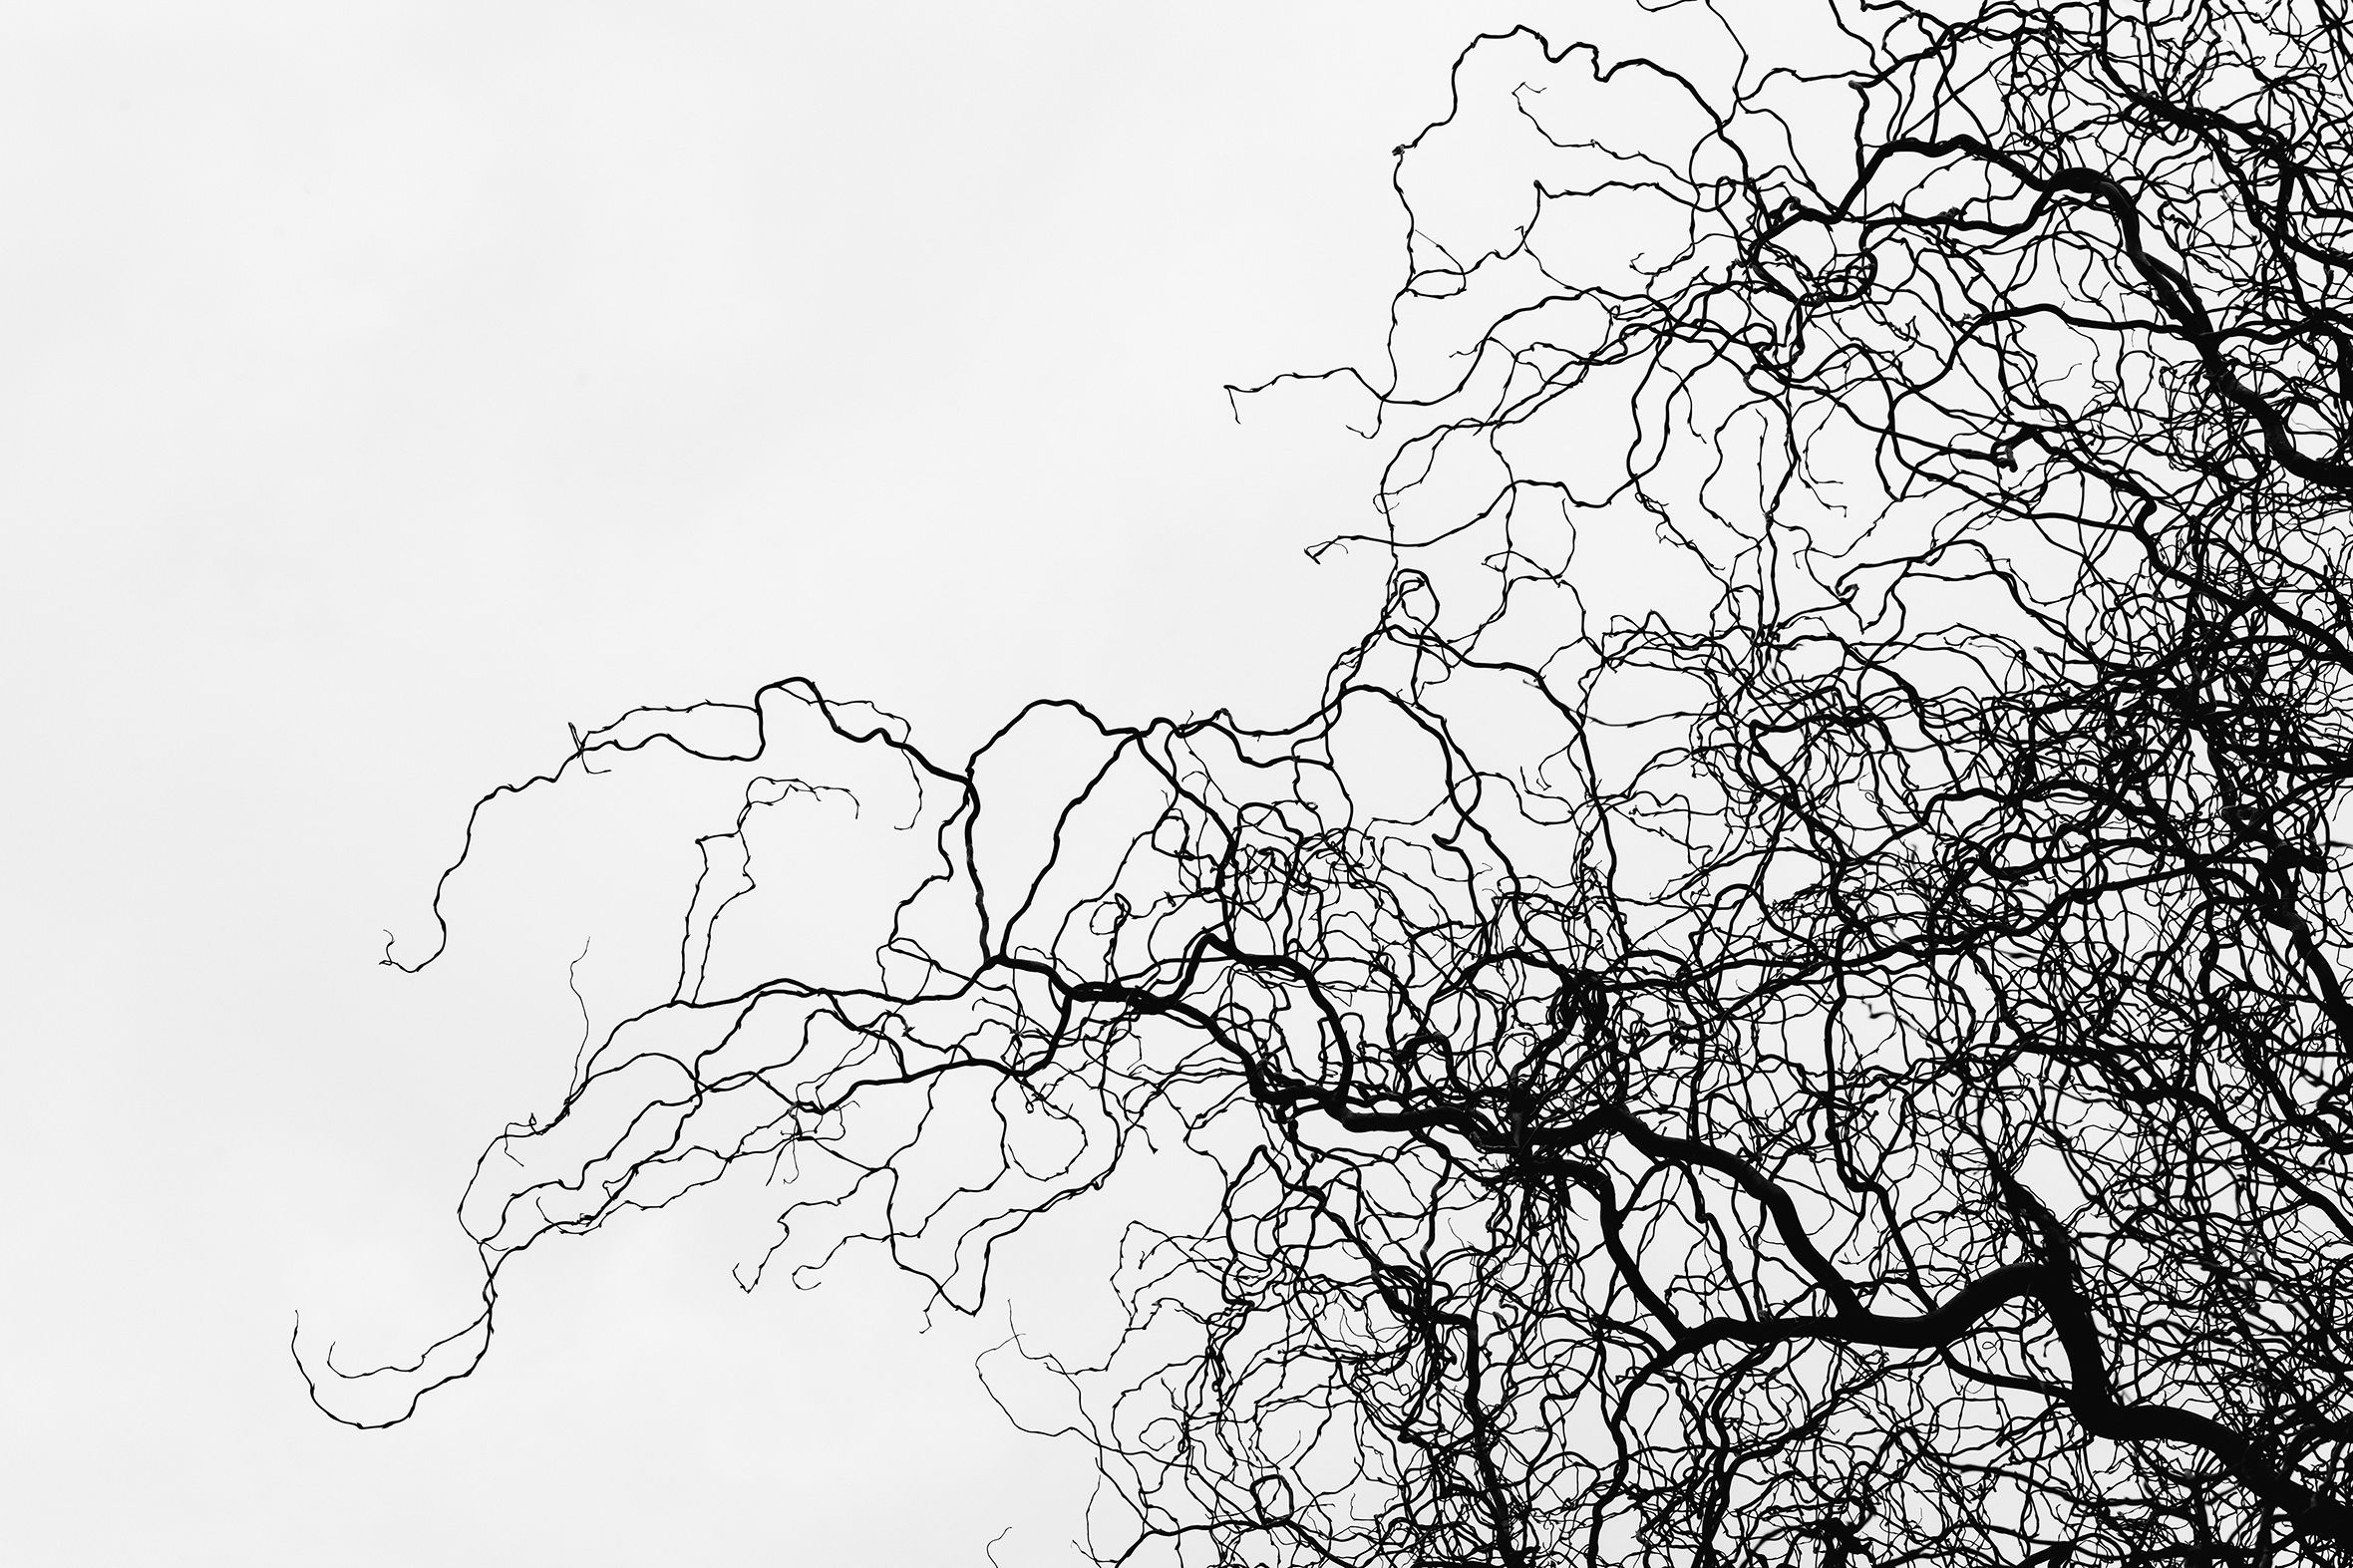 Wavy, bare branches of a willow tree emerge from the right side of the image and squiggle three-quarters of the way across.